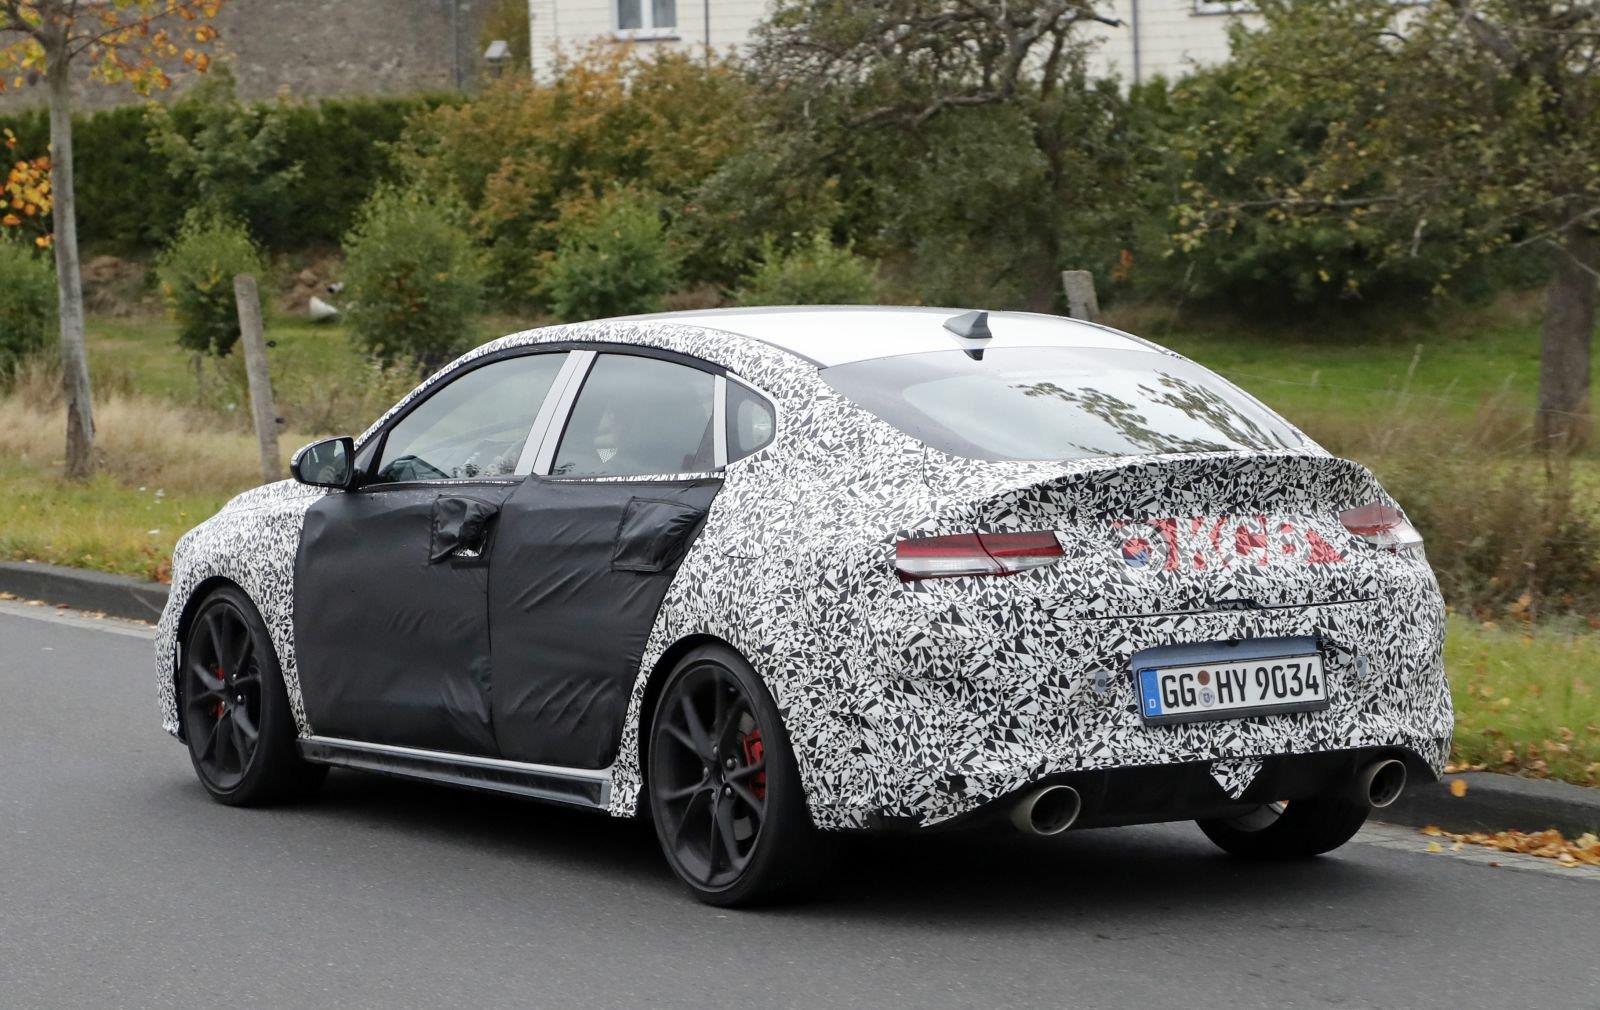 Hyundai i30 N Facelift Spied loses camouflage again